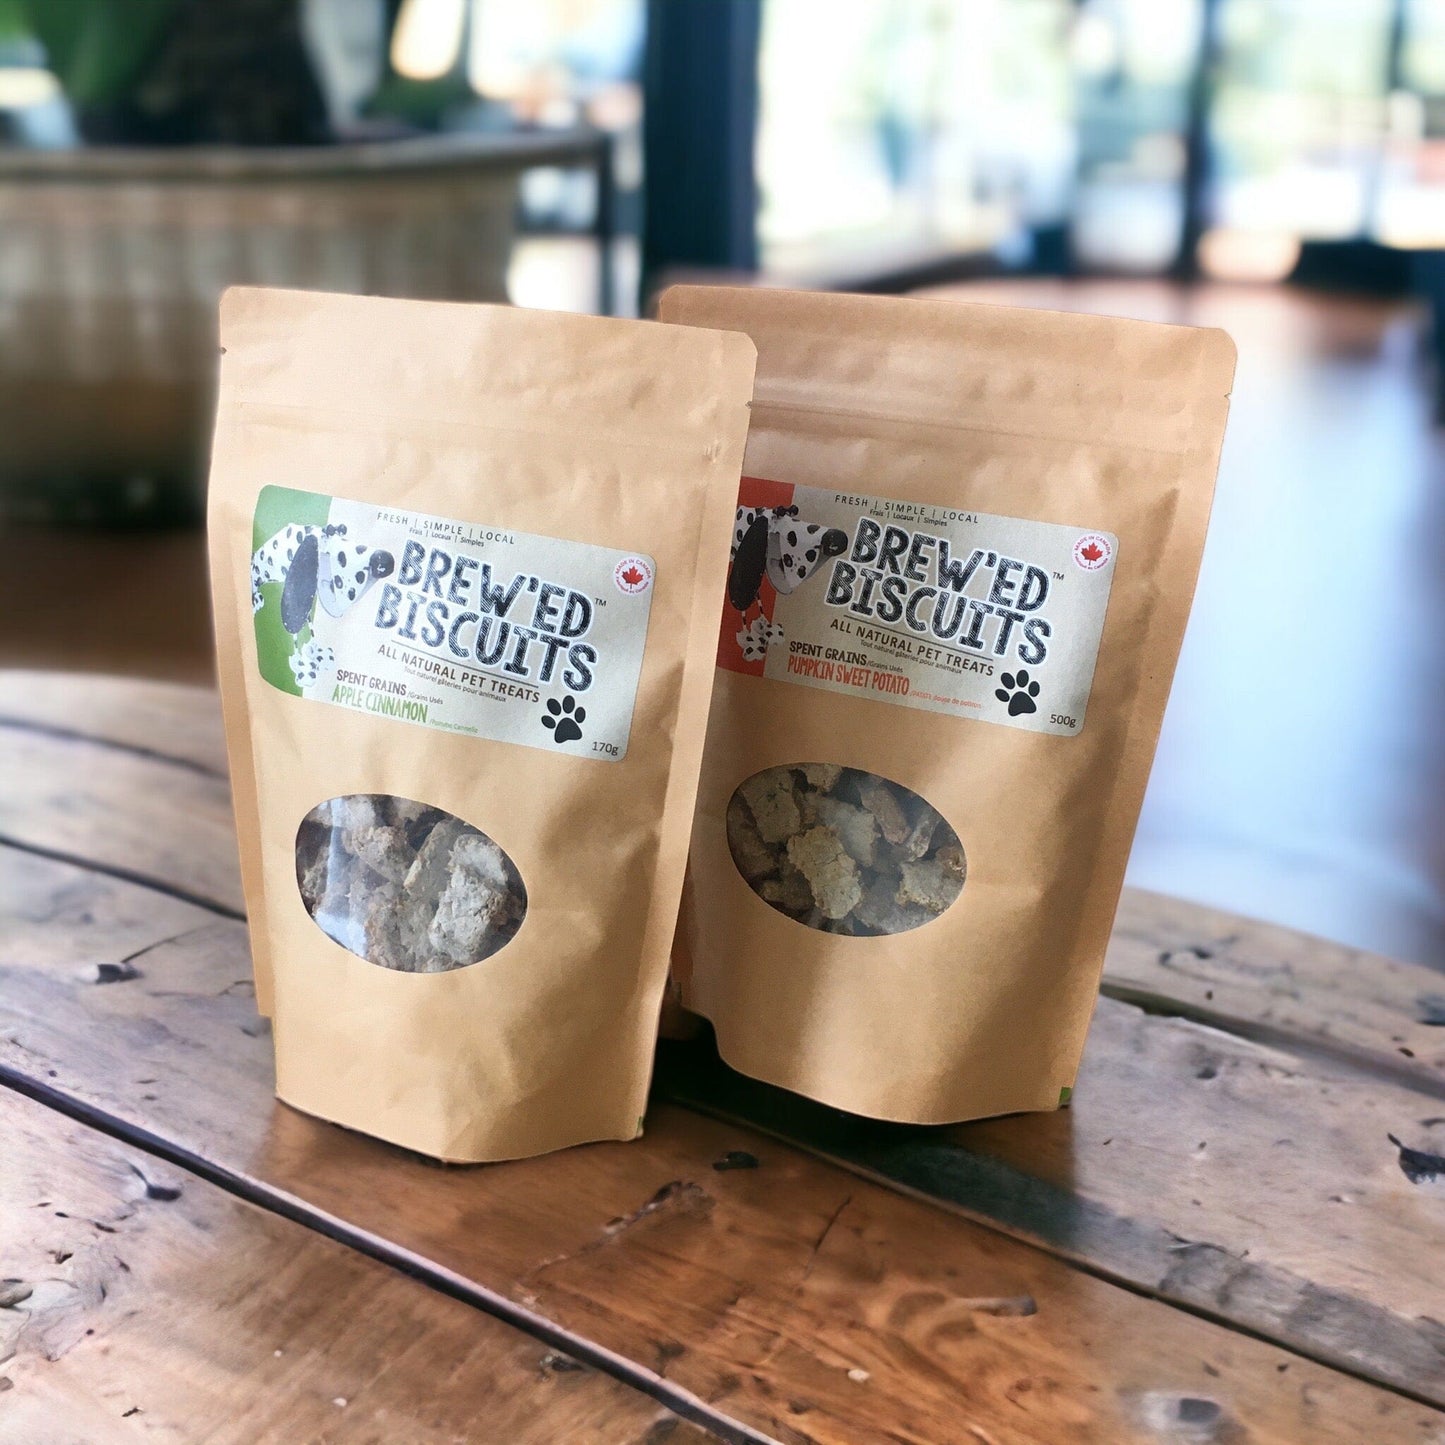 THE ECO DOG SNACK PACK : UPCYCLED BREW'ED BISCUITS PUMPKIN SWEET POTATO & APPLE CINNAMON